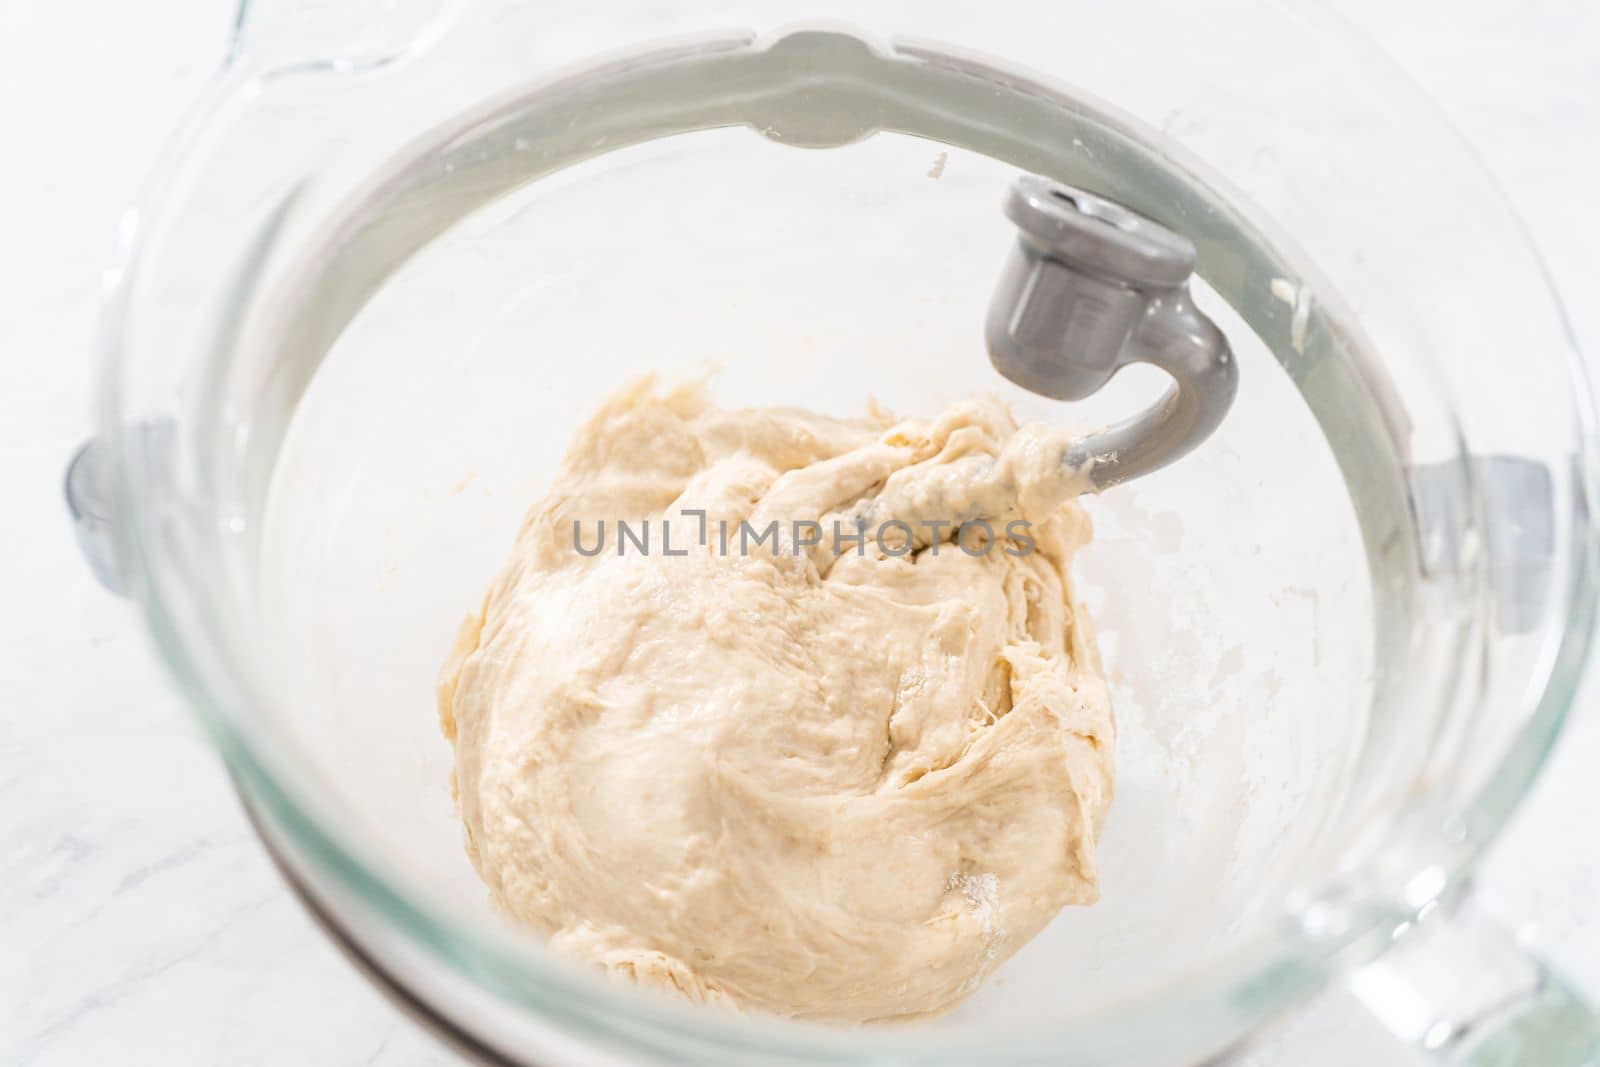 Mixing bread dough in a stand-alone kitchen mixer to bake patriotic cinnamon twists.